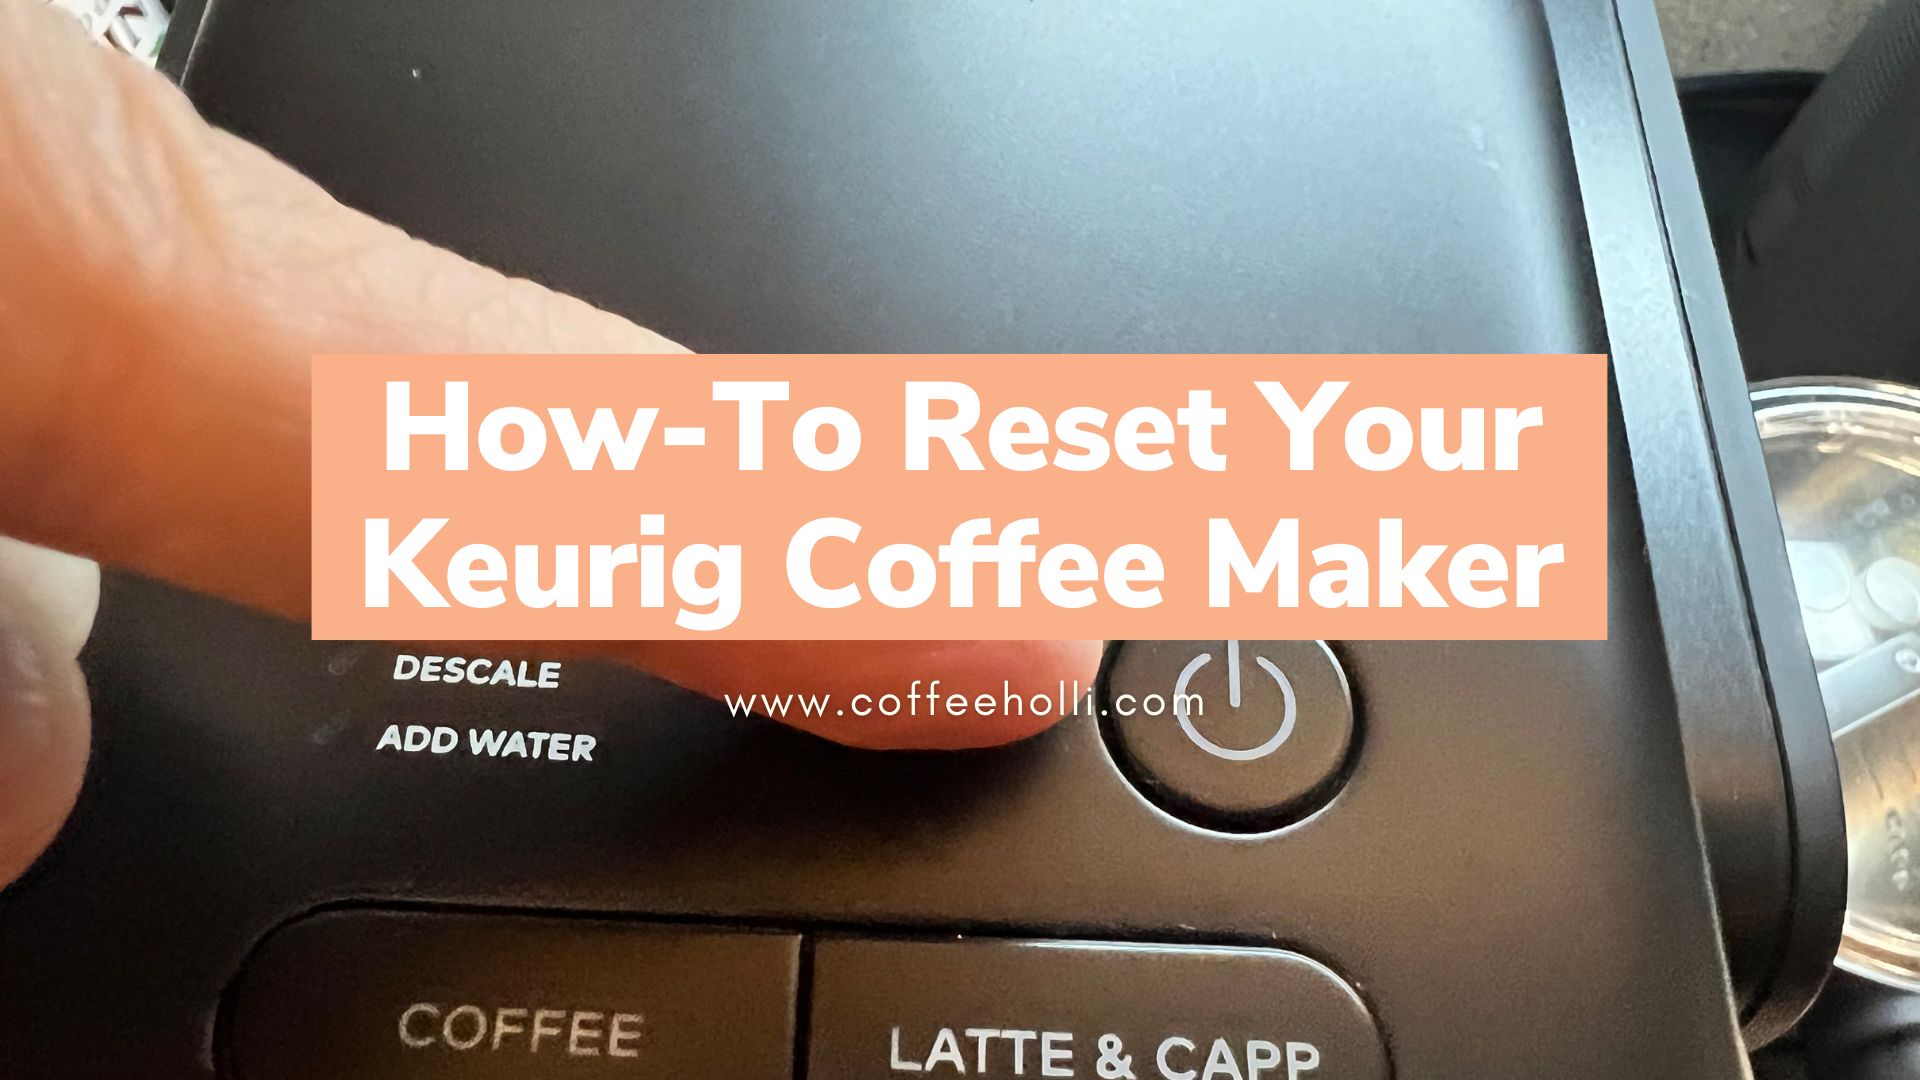 How-To Reset Your Keurig Coffee Maker